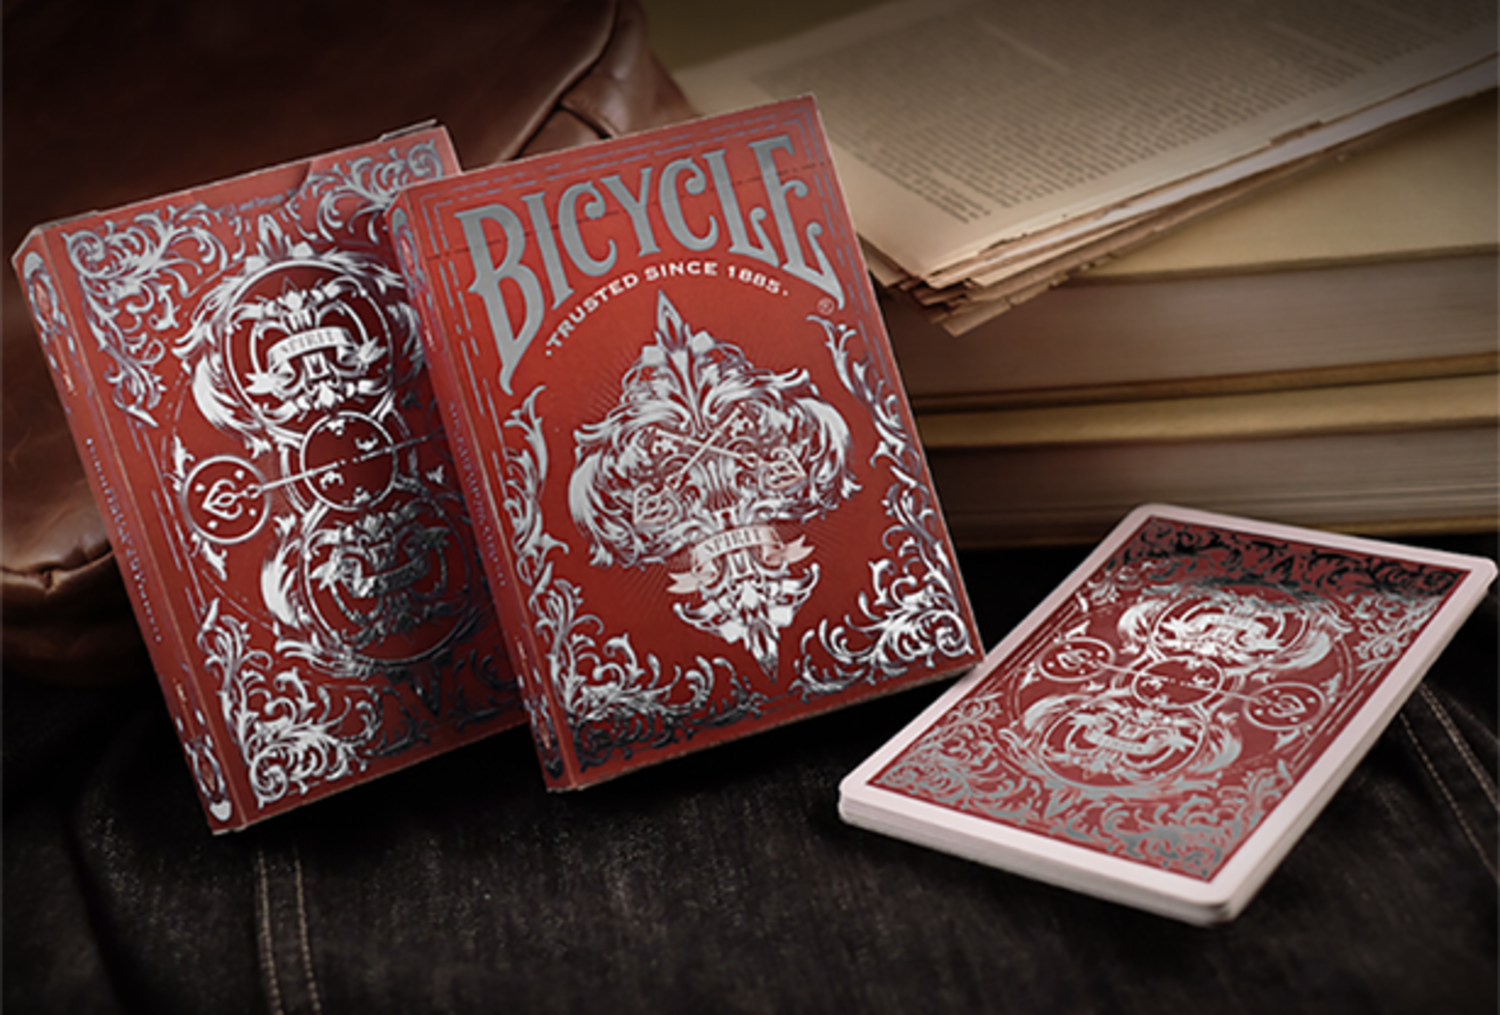 bicycle cards metalluxe